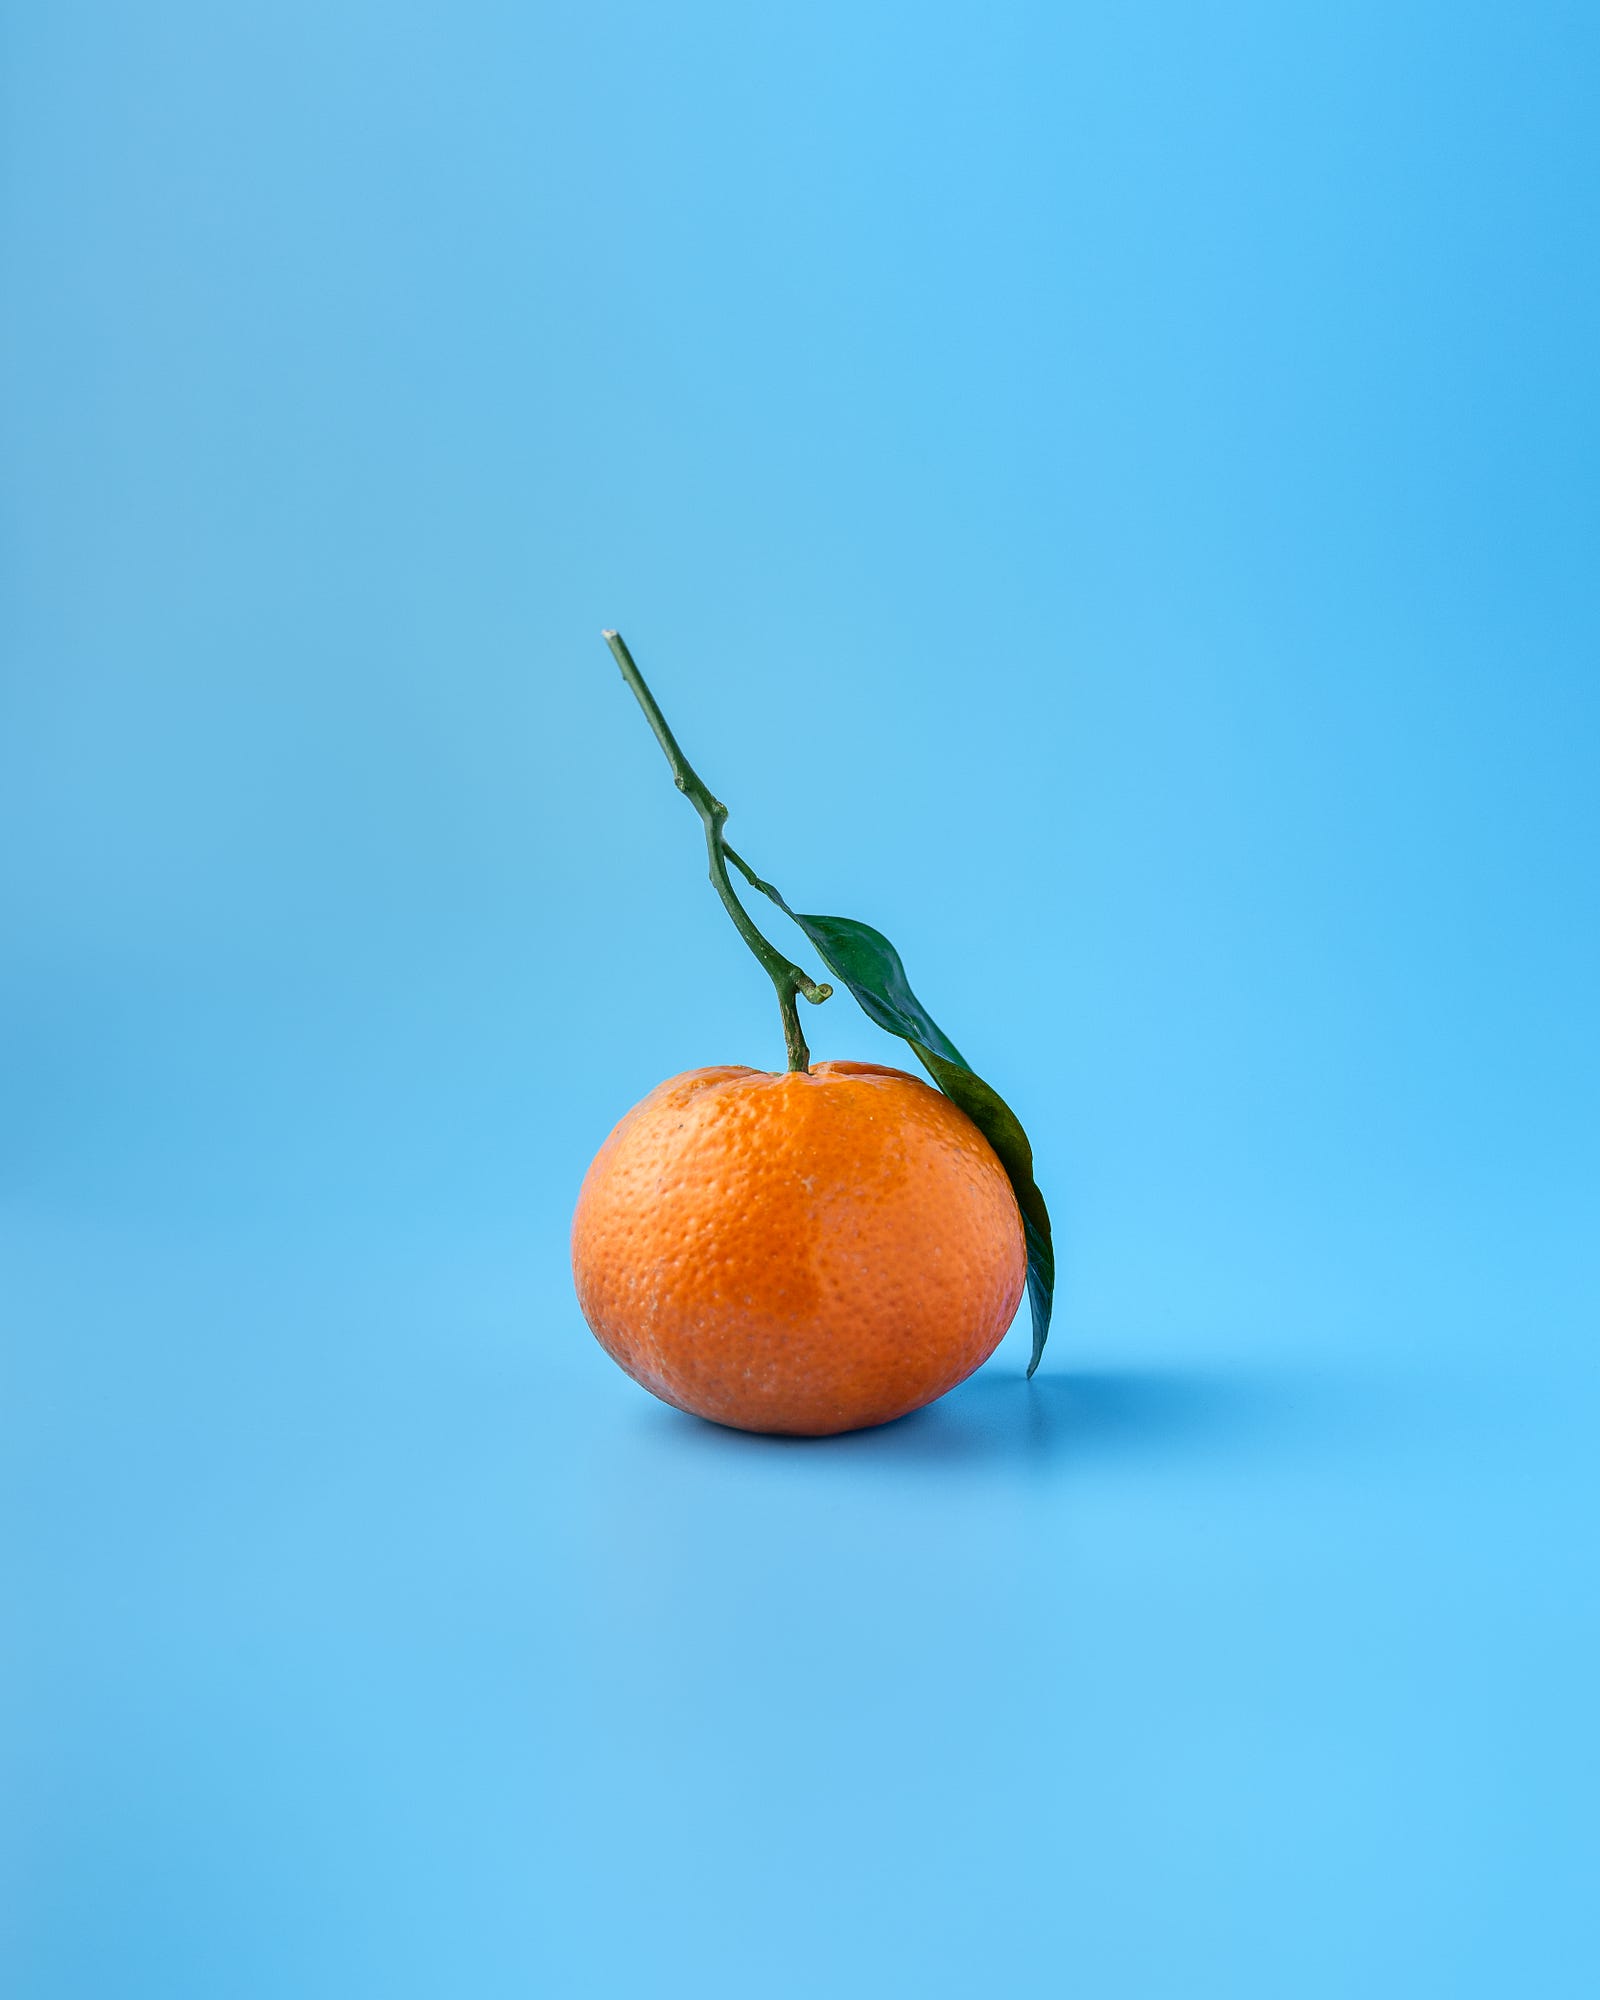 A single satsuma (or mikan) is set against a light blue background. Obesity can lead to health problems. These health issues include type 2 diabetes, cardiovascular disease, some cancers, fatty liver disease, and more.